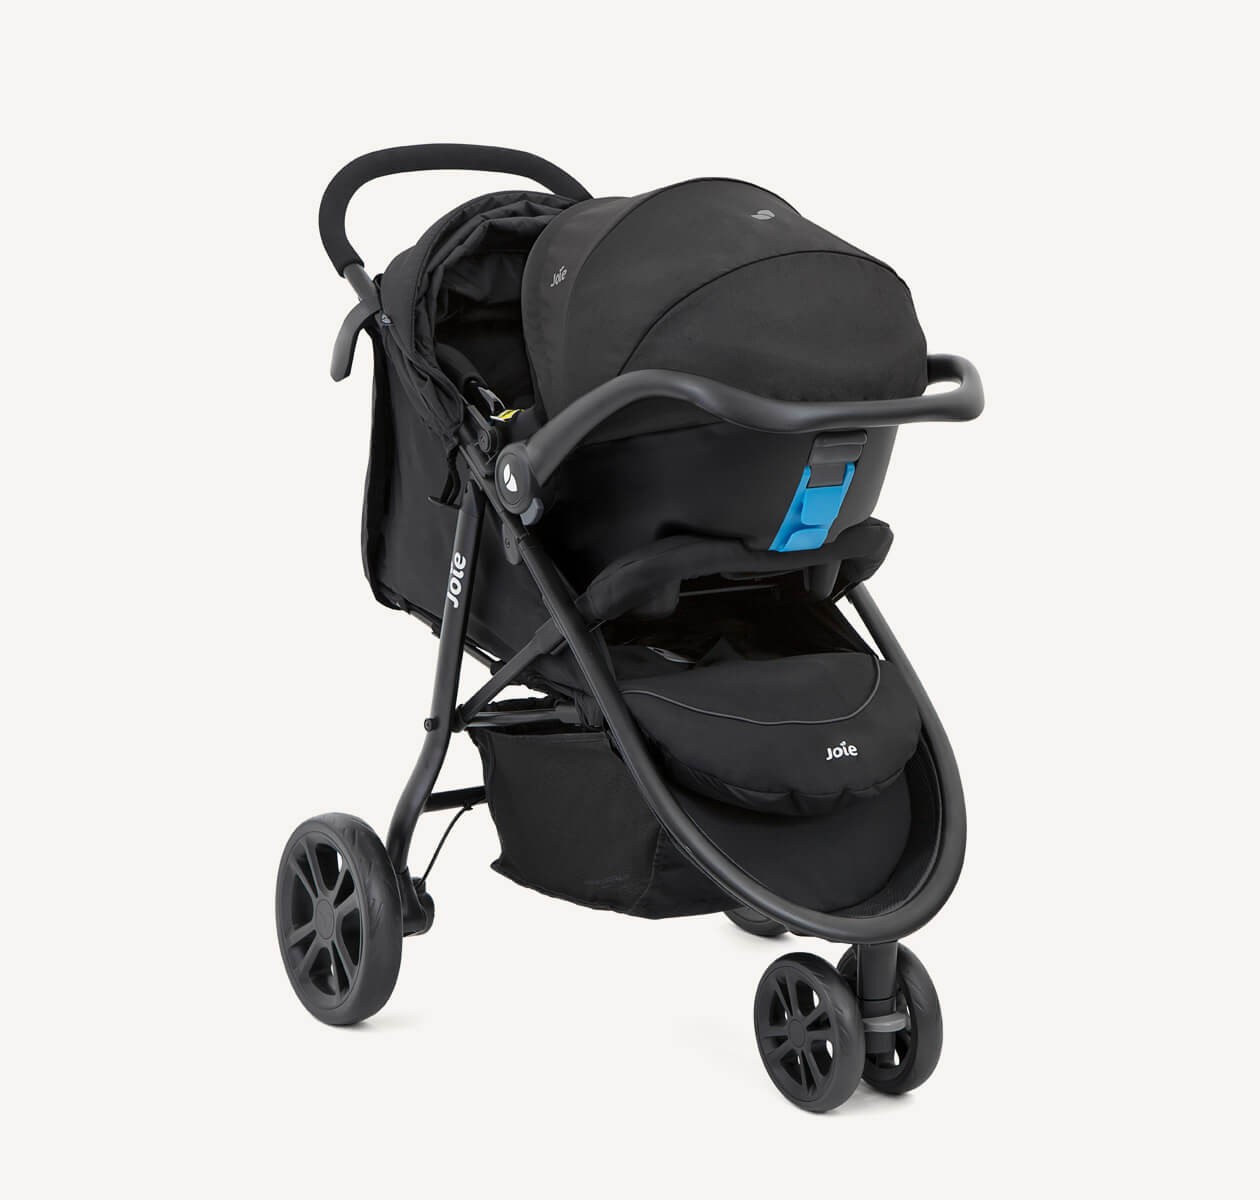  Joie litetrax 3 stroller in black at an angle.